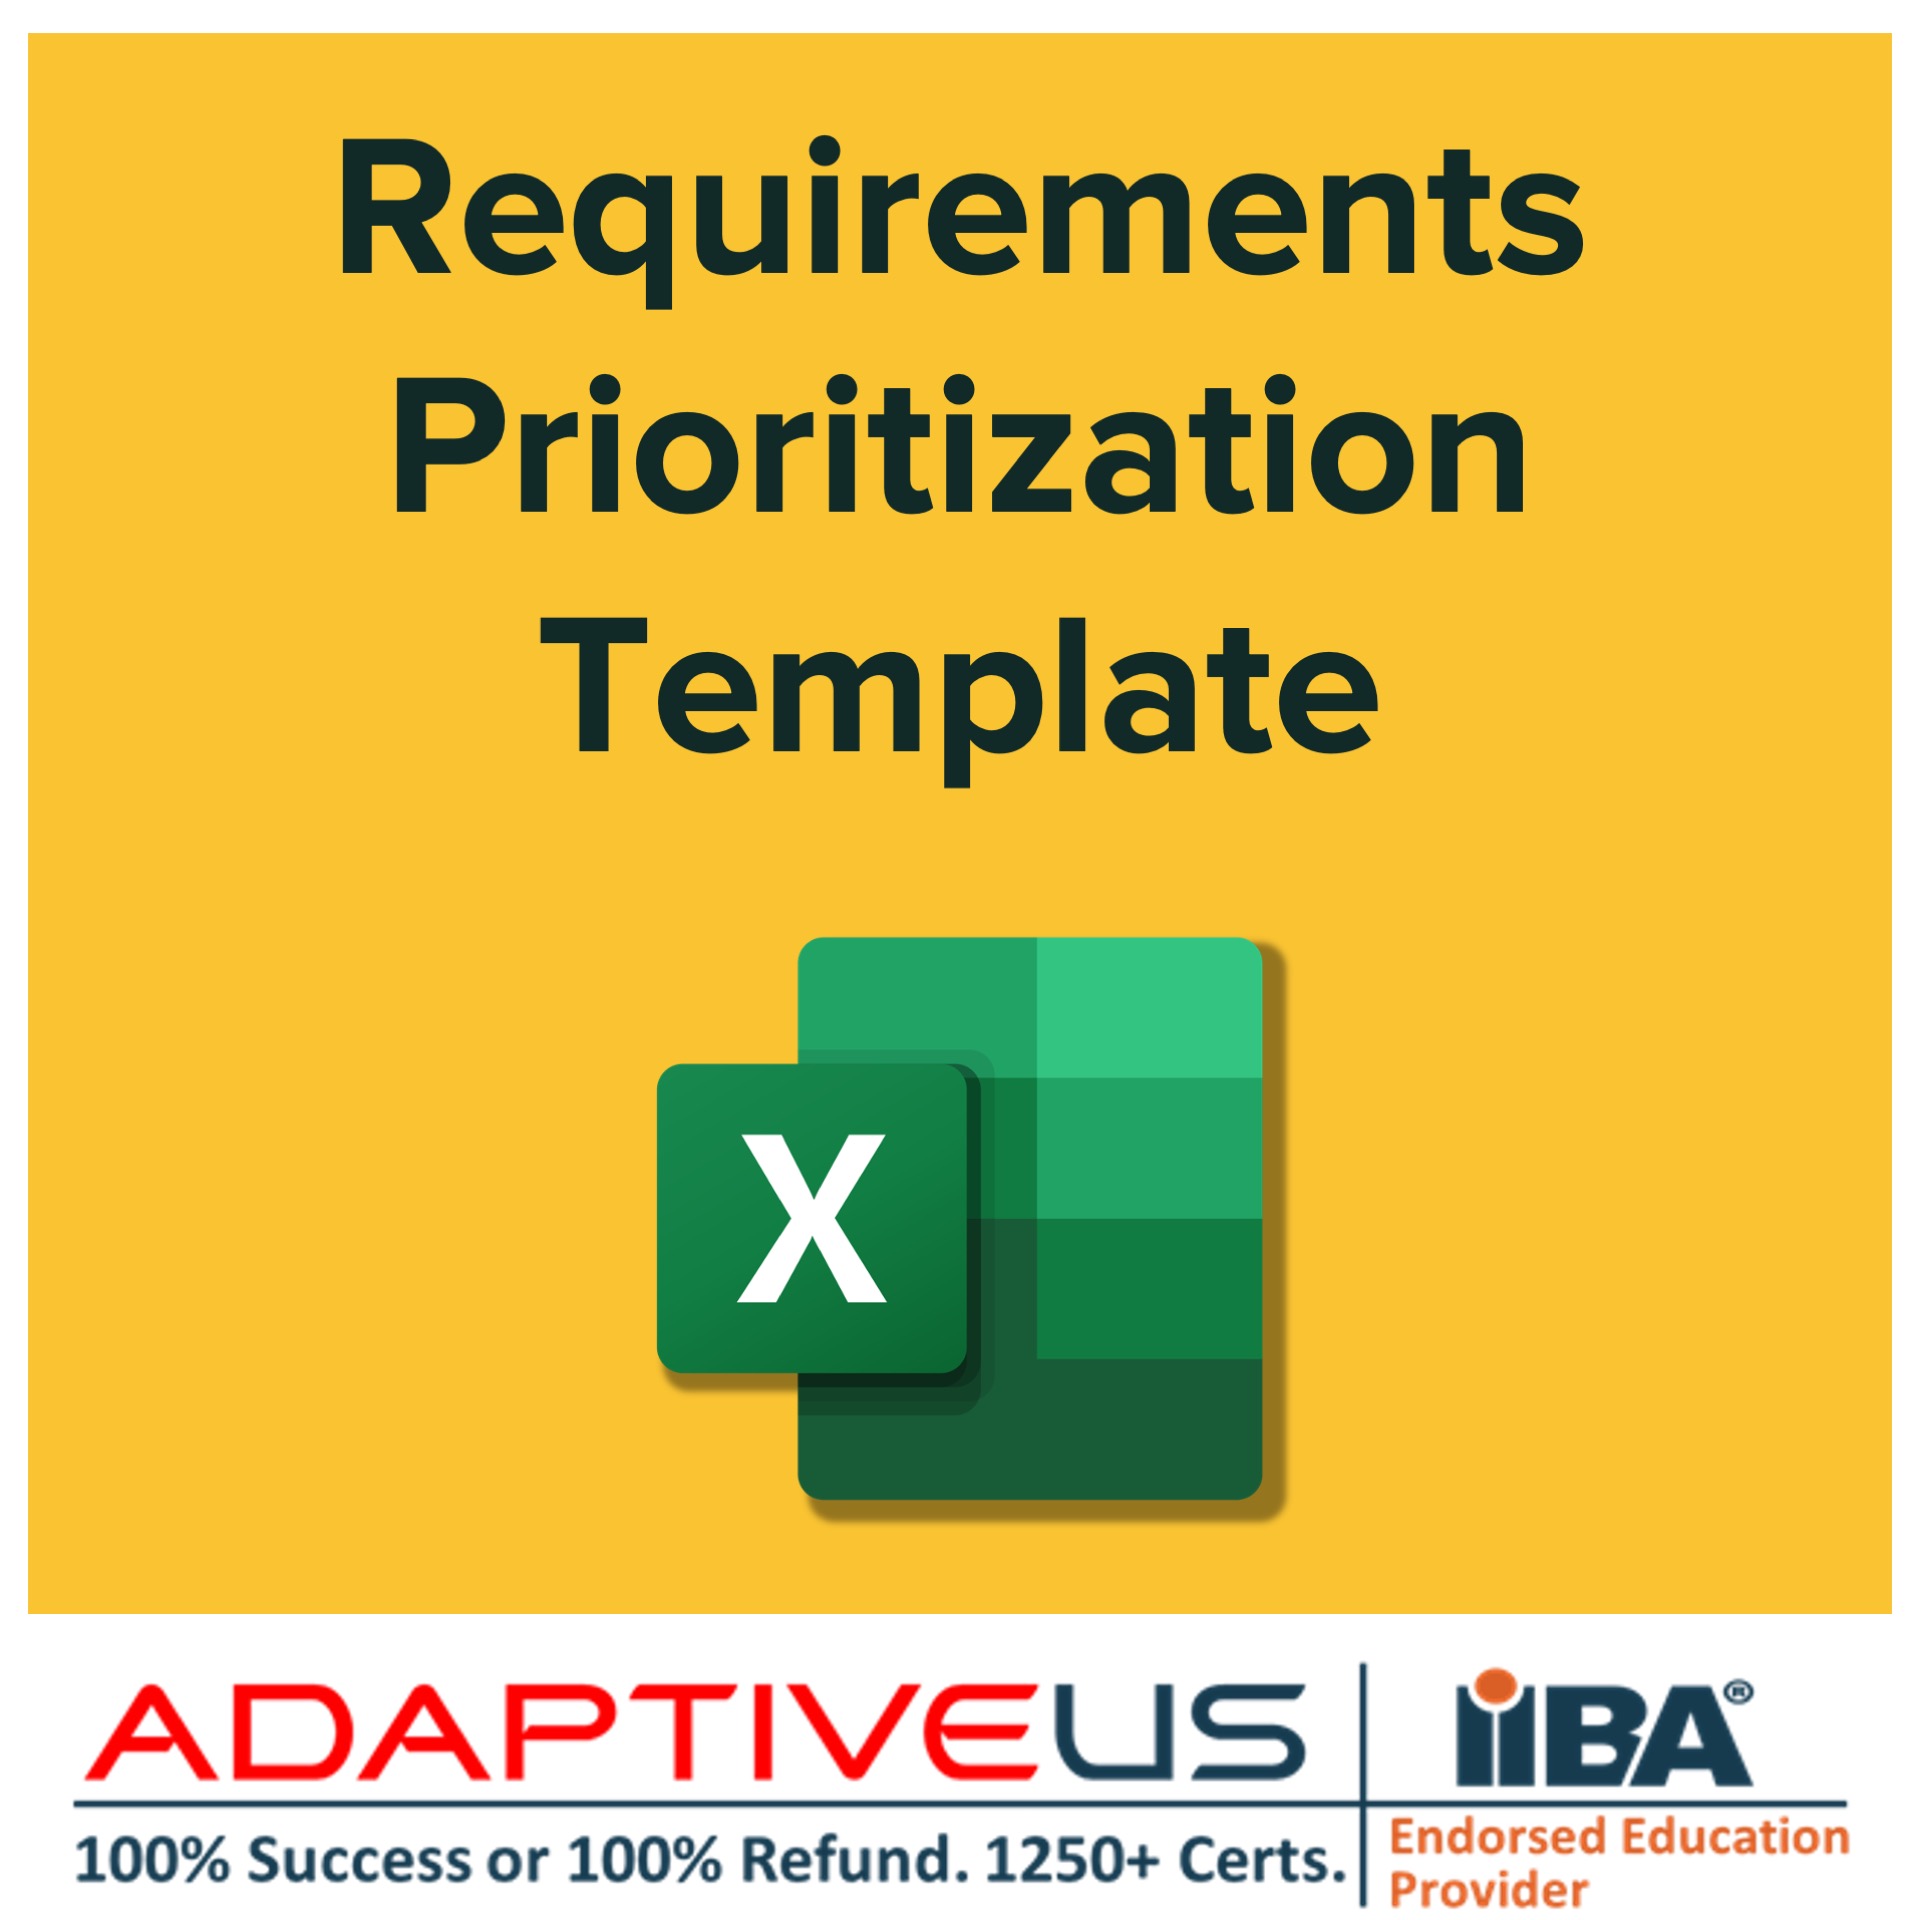 Requirements Prioritization Template